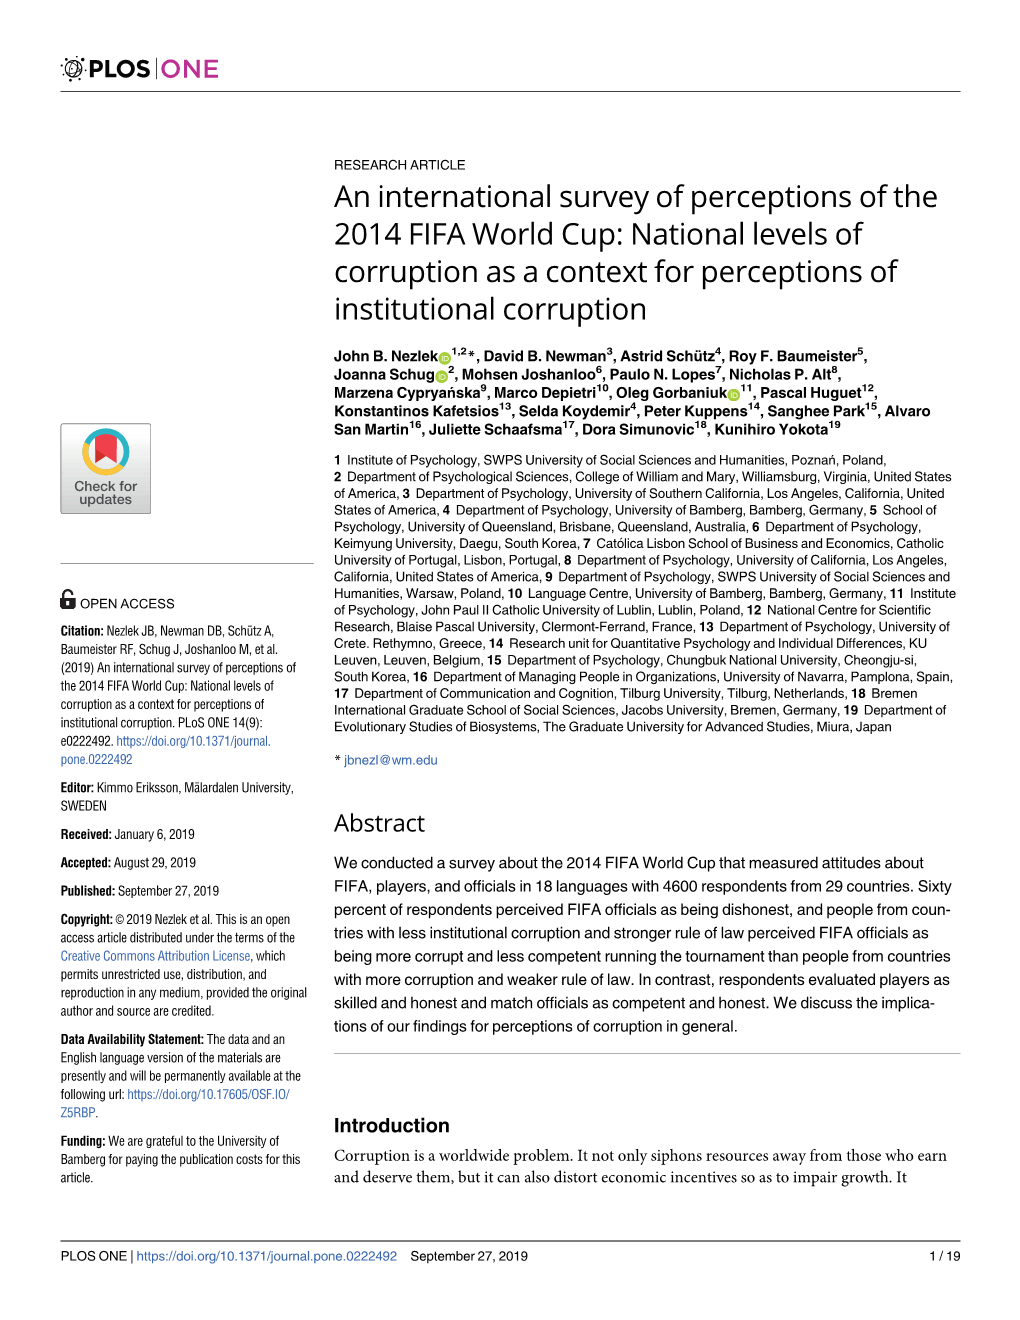 An International Survey of Perceptions of the 2014 FIFA World Cup: National Levels of Corruption As a Context for Perceptions of Institutional Corruption